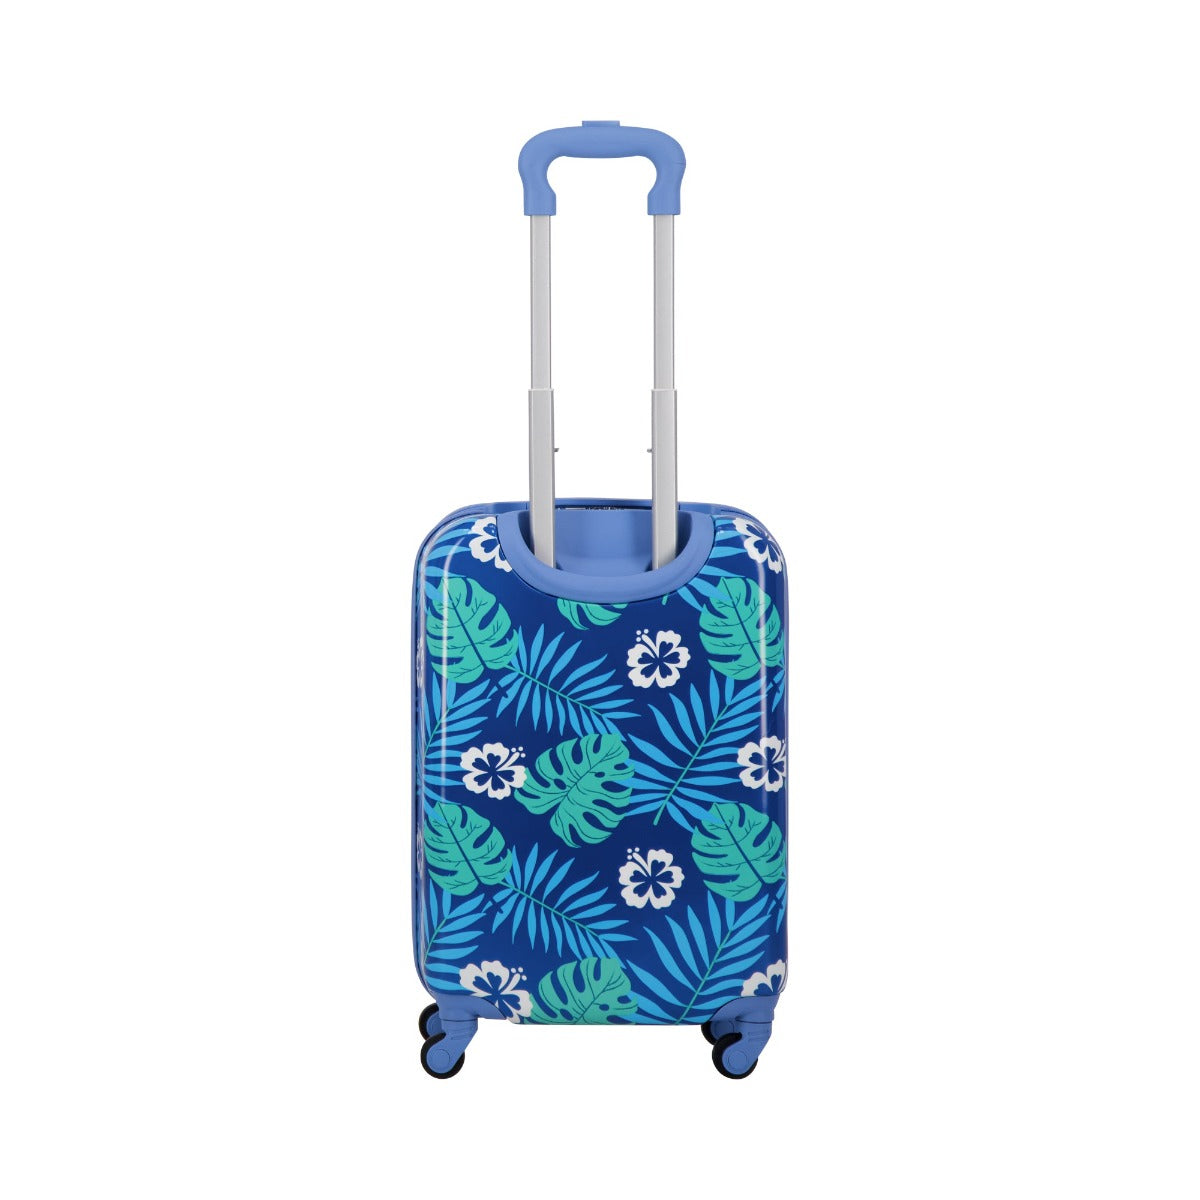 Disney Ful Stitch tropical leaves 2 piece suitcase backpack set - best 21 inch carry-on luggage for kids